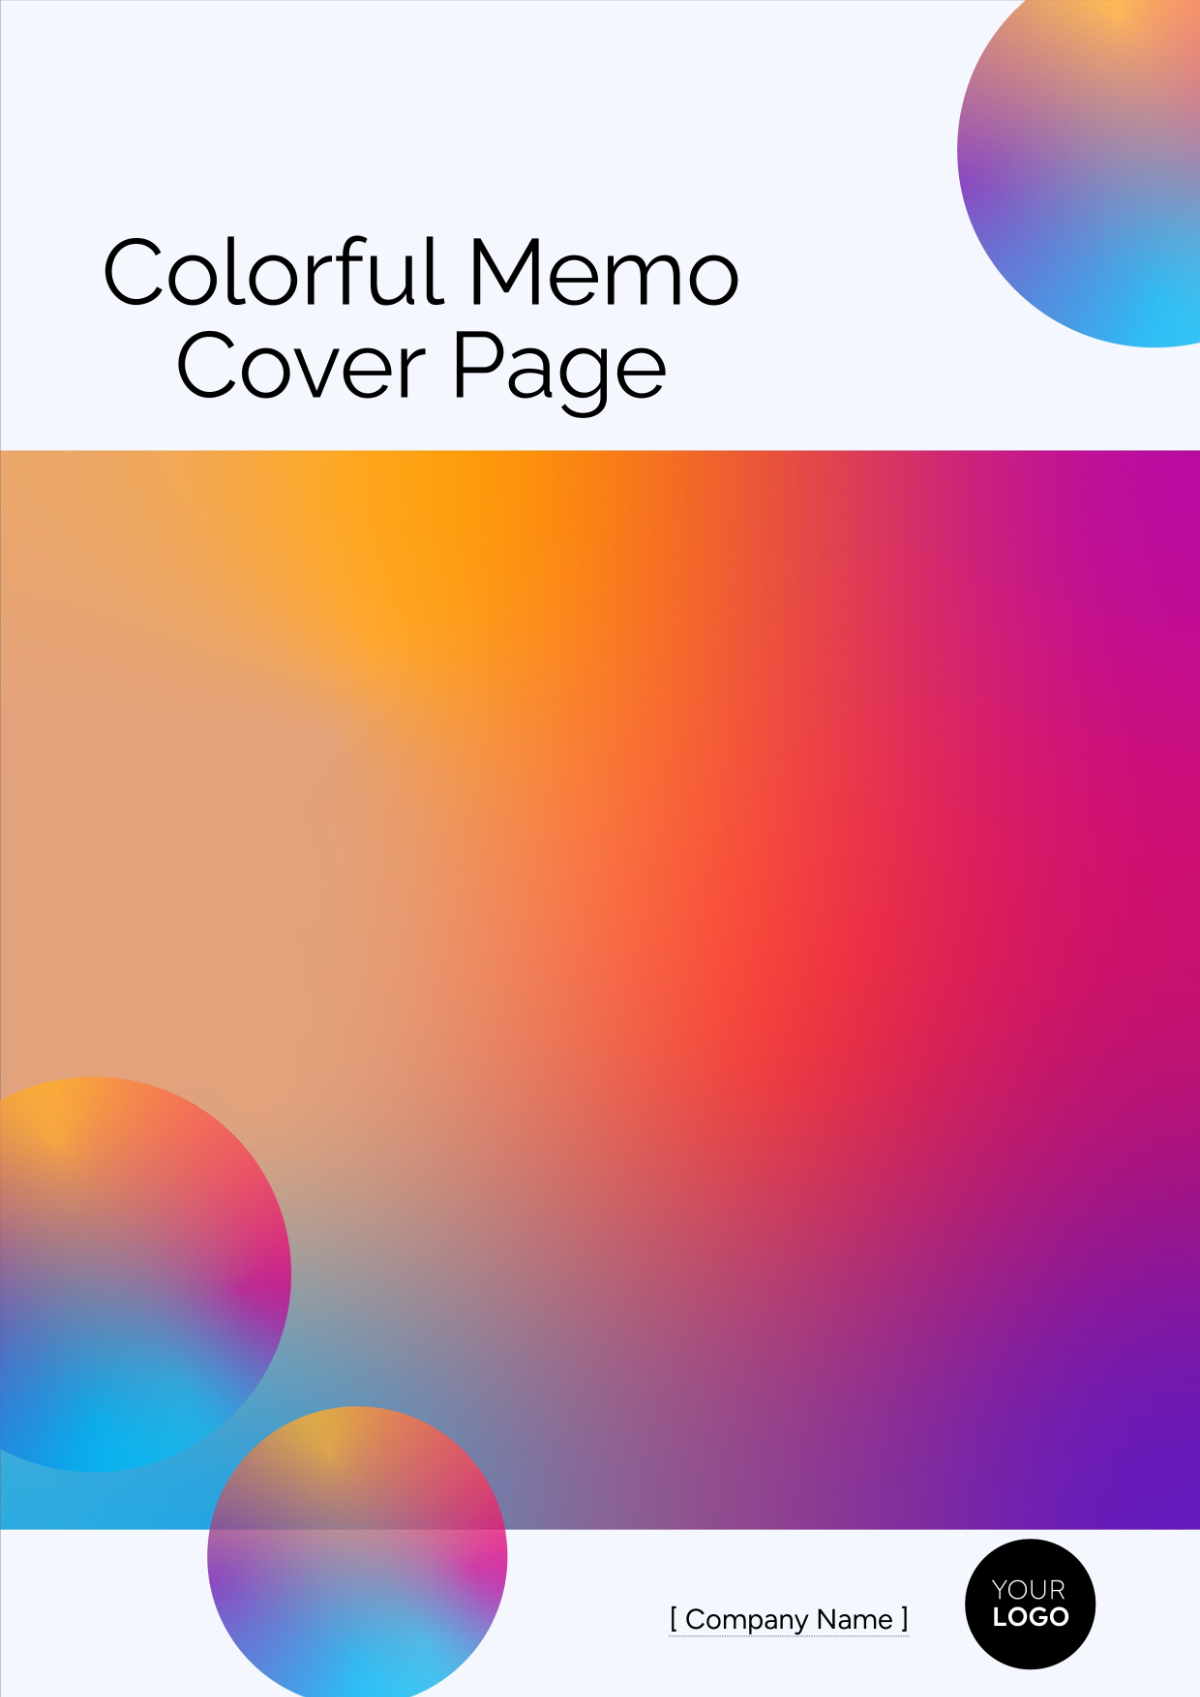 Colorful Memo Cover Page Template